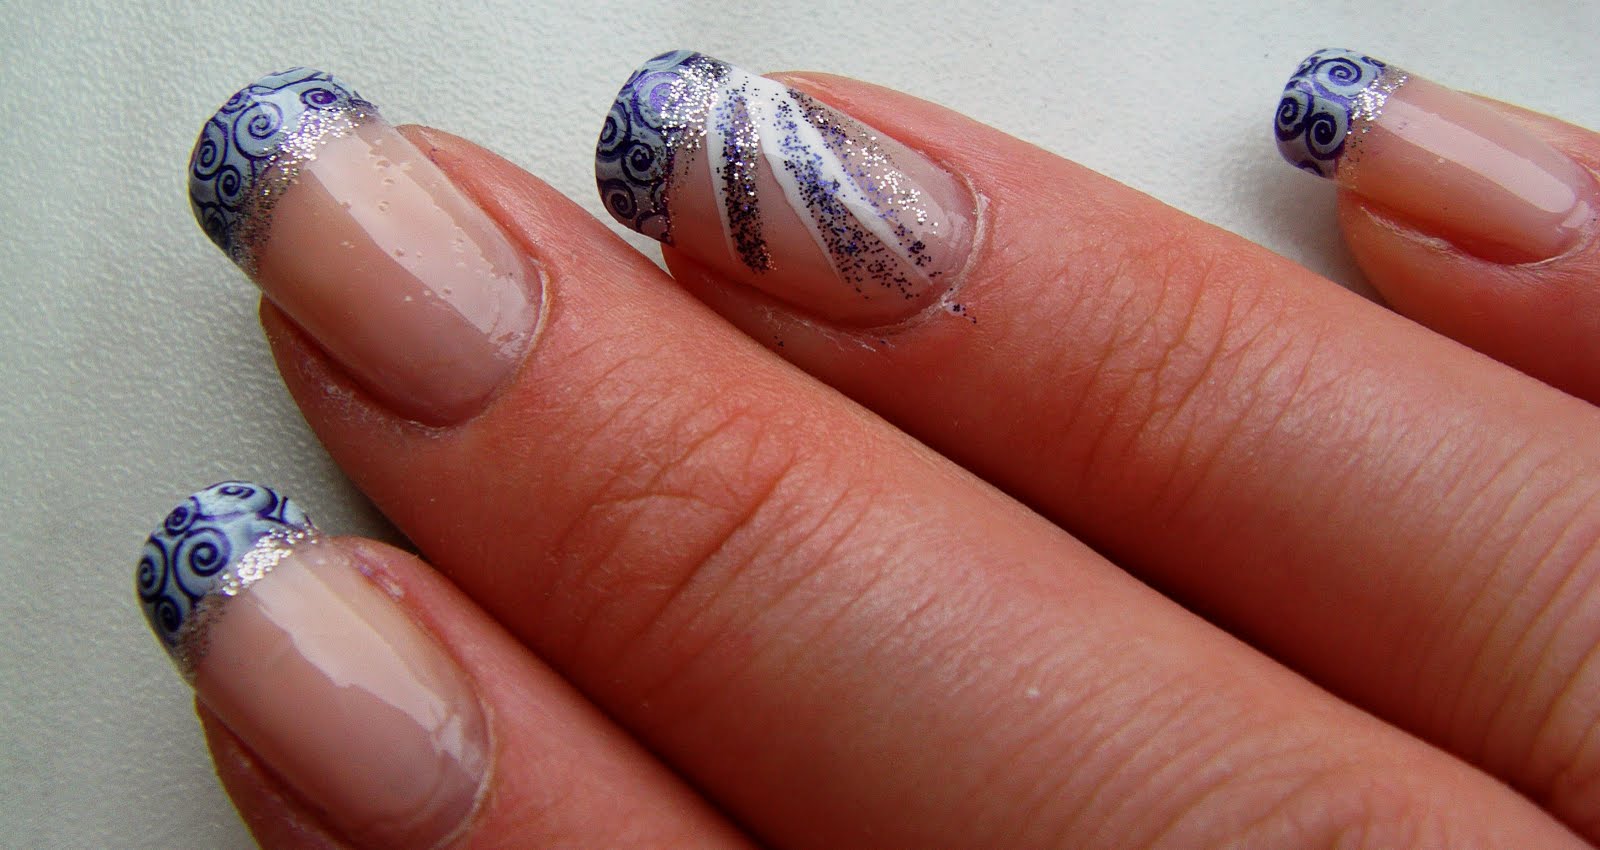 All about nails: Purple swirly french tip design